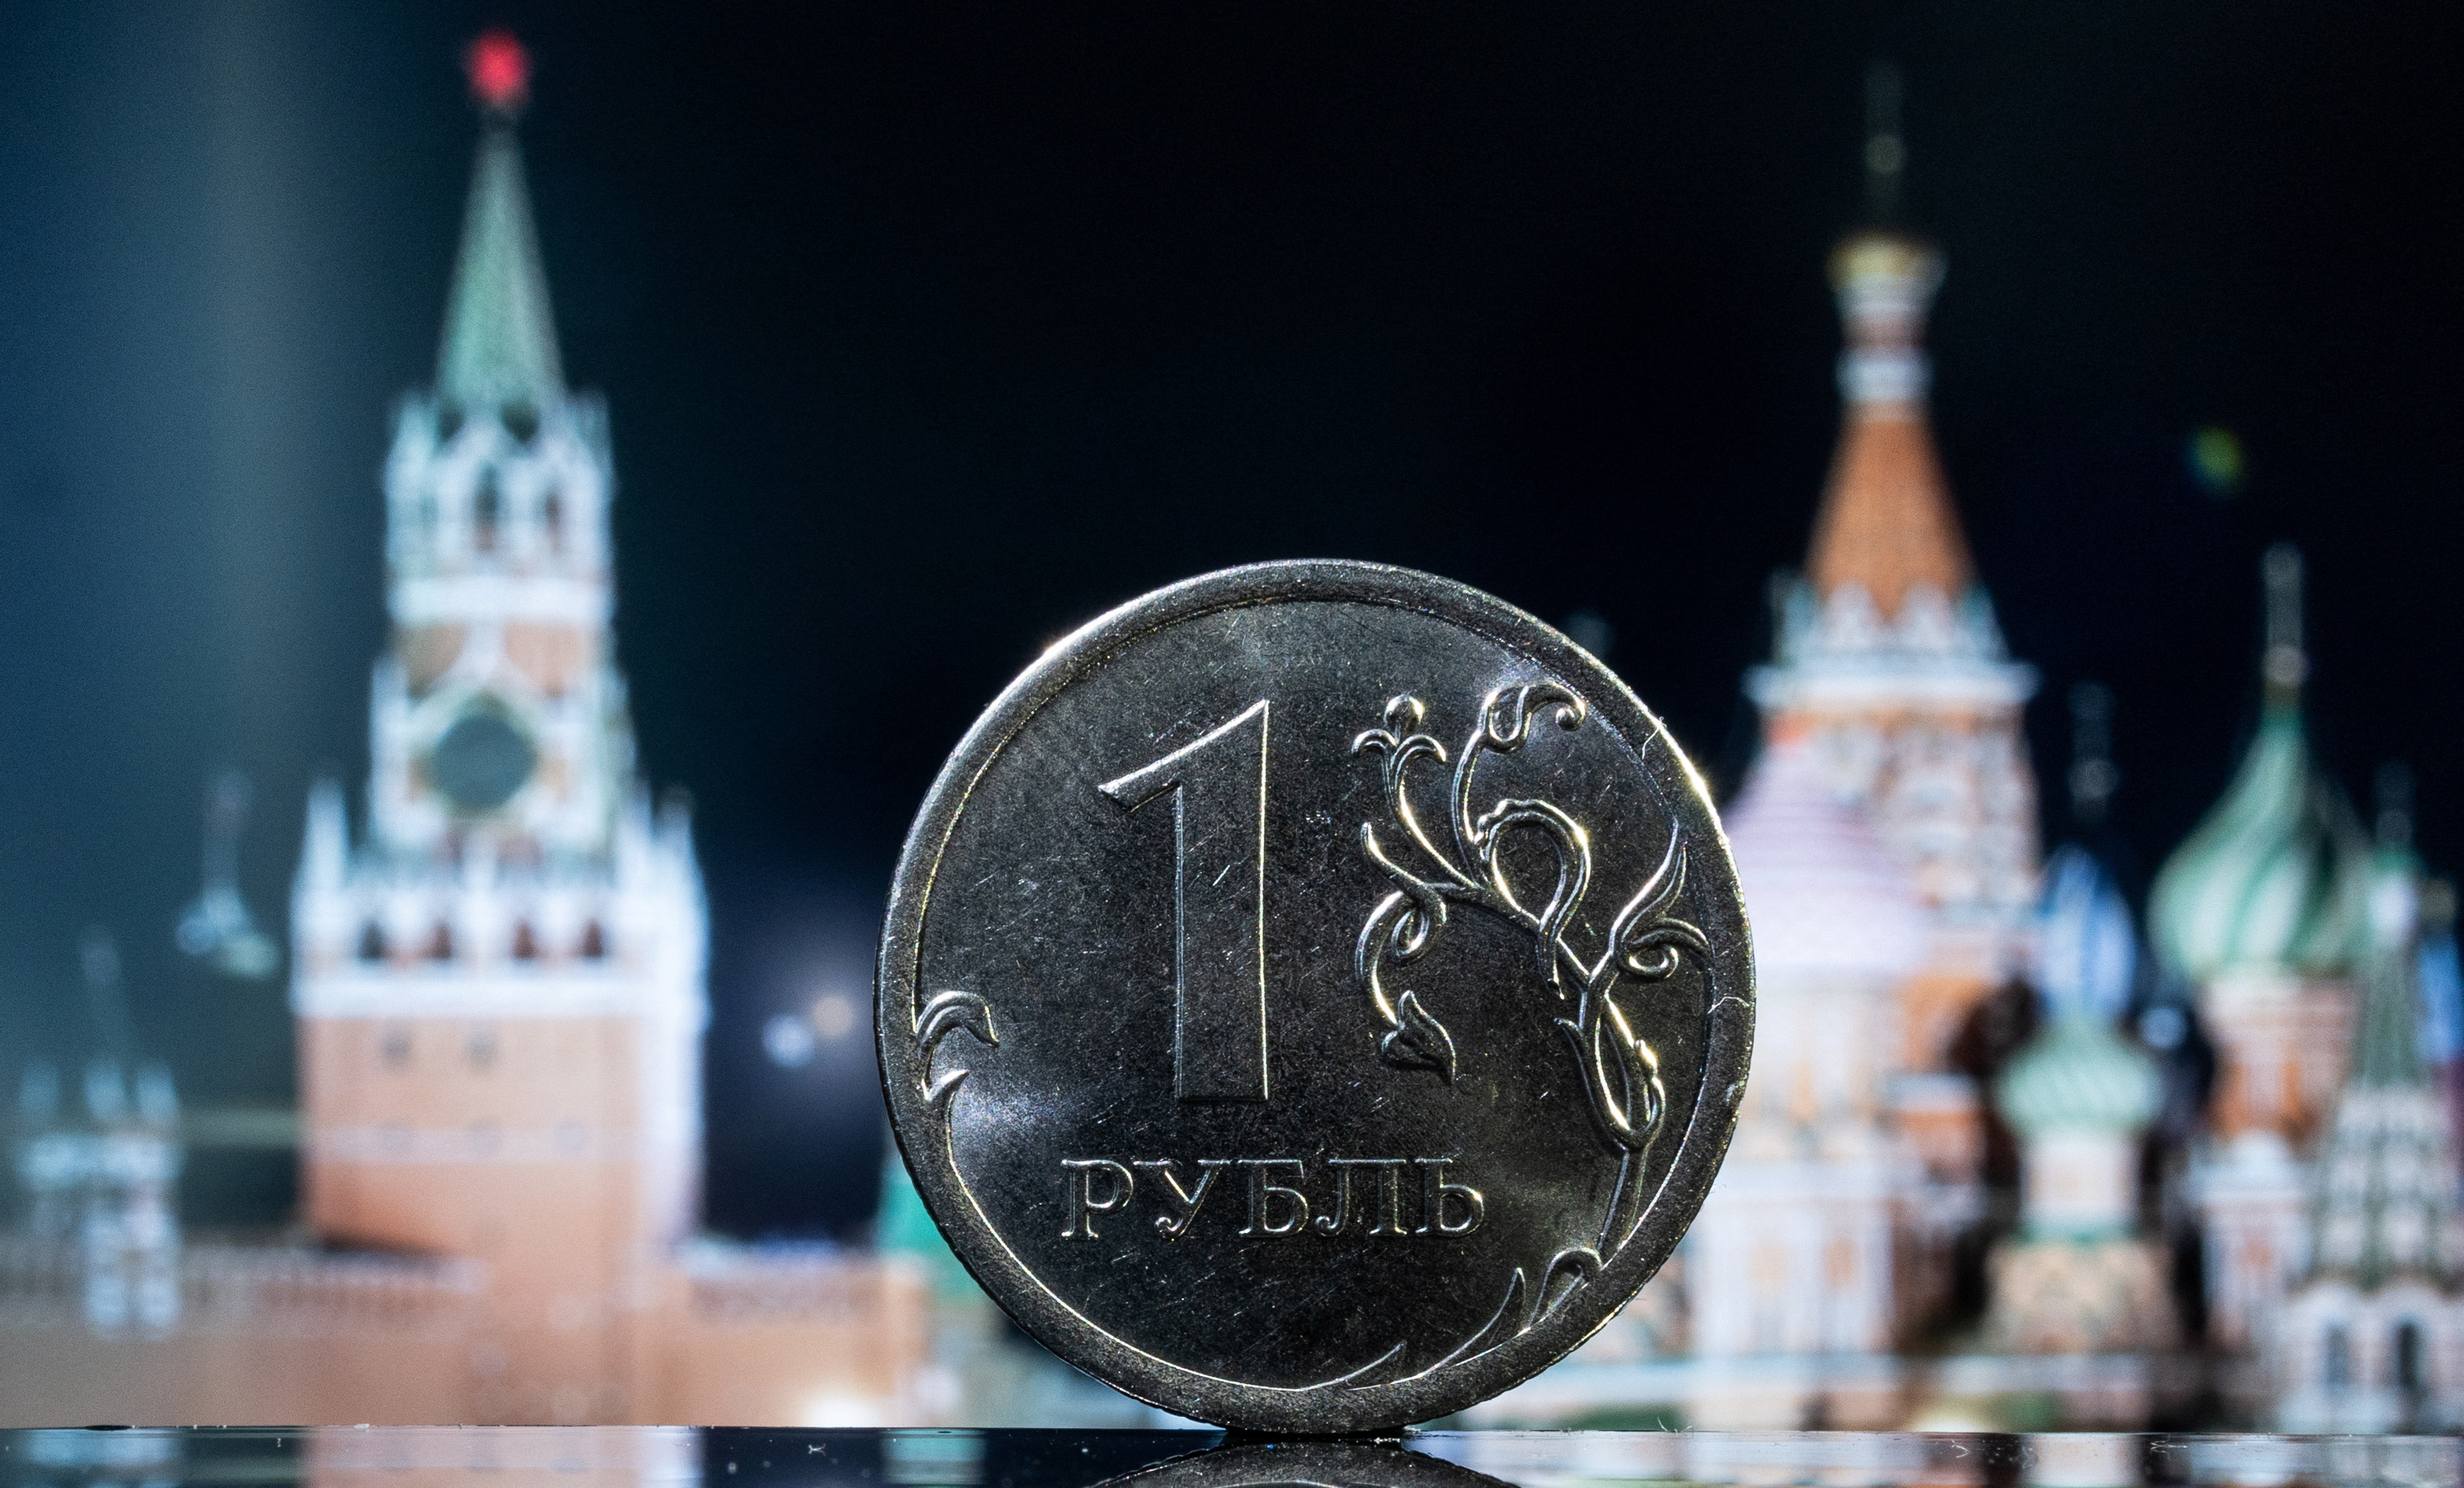 A Russian one rouble coin is pictured in front of a monitor showing the Kremlin's tower